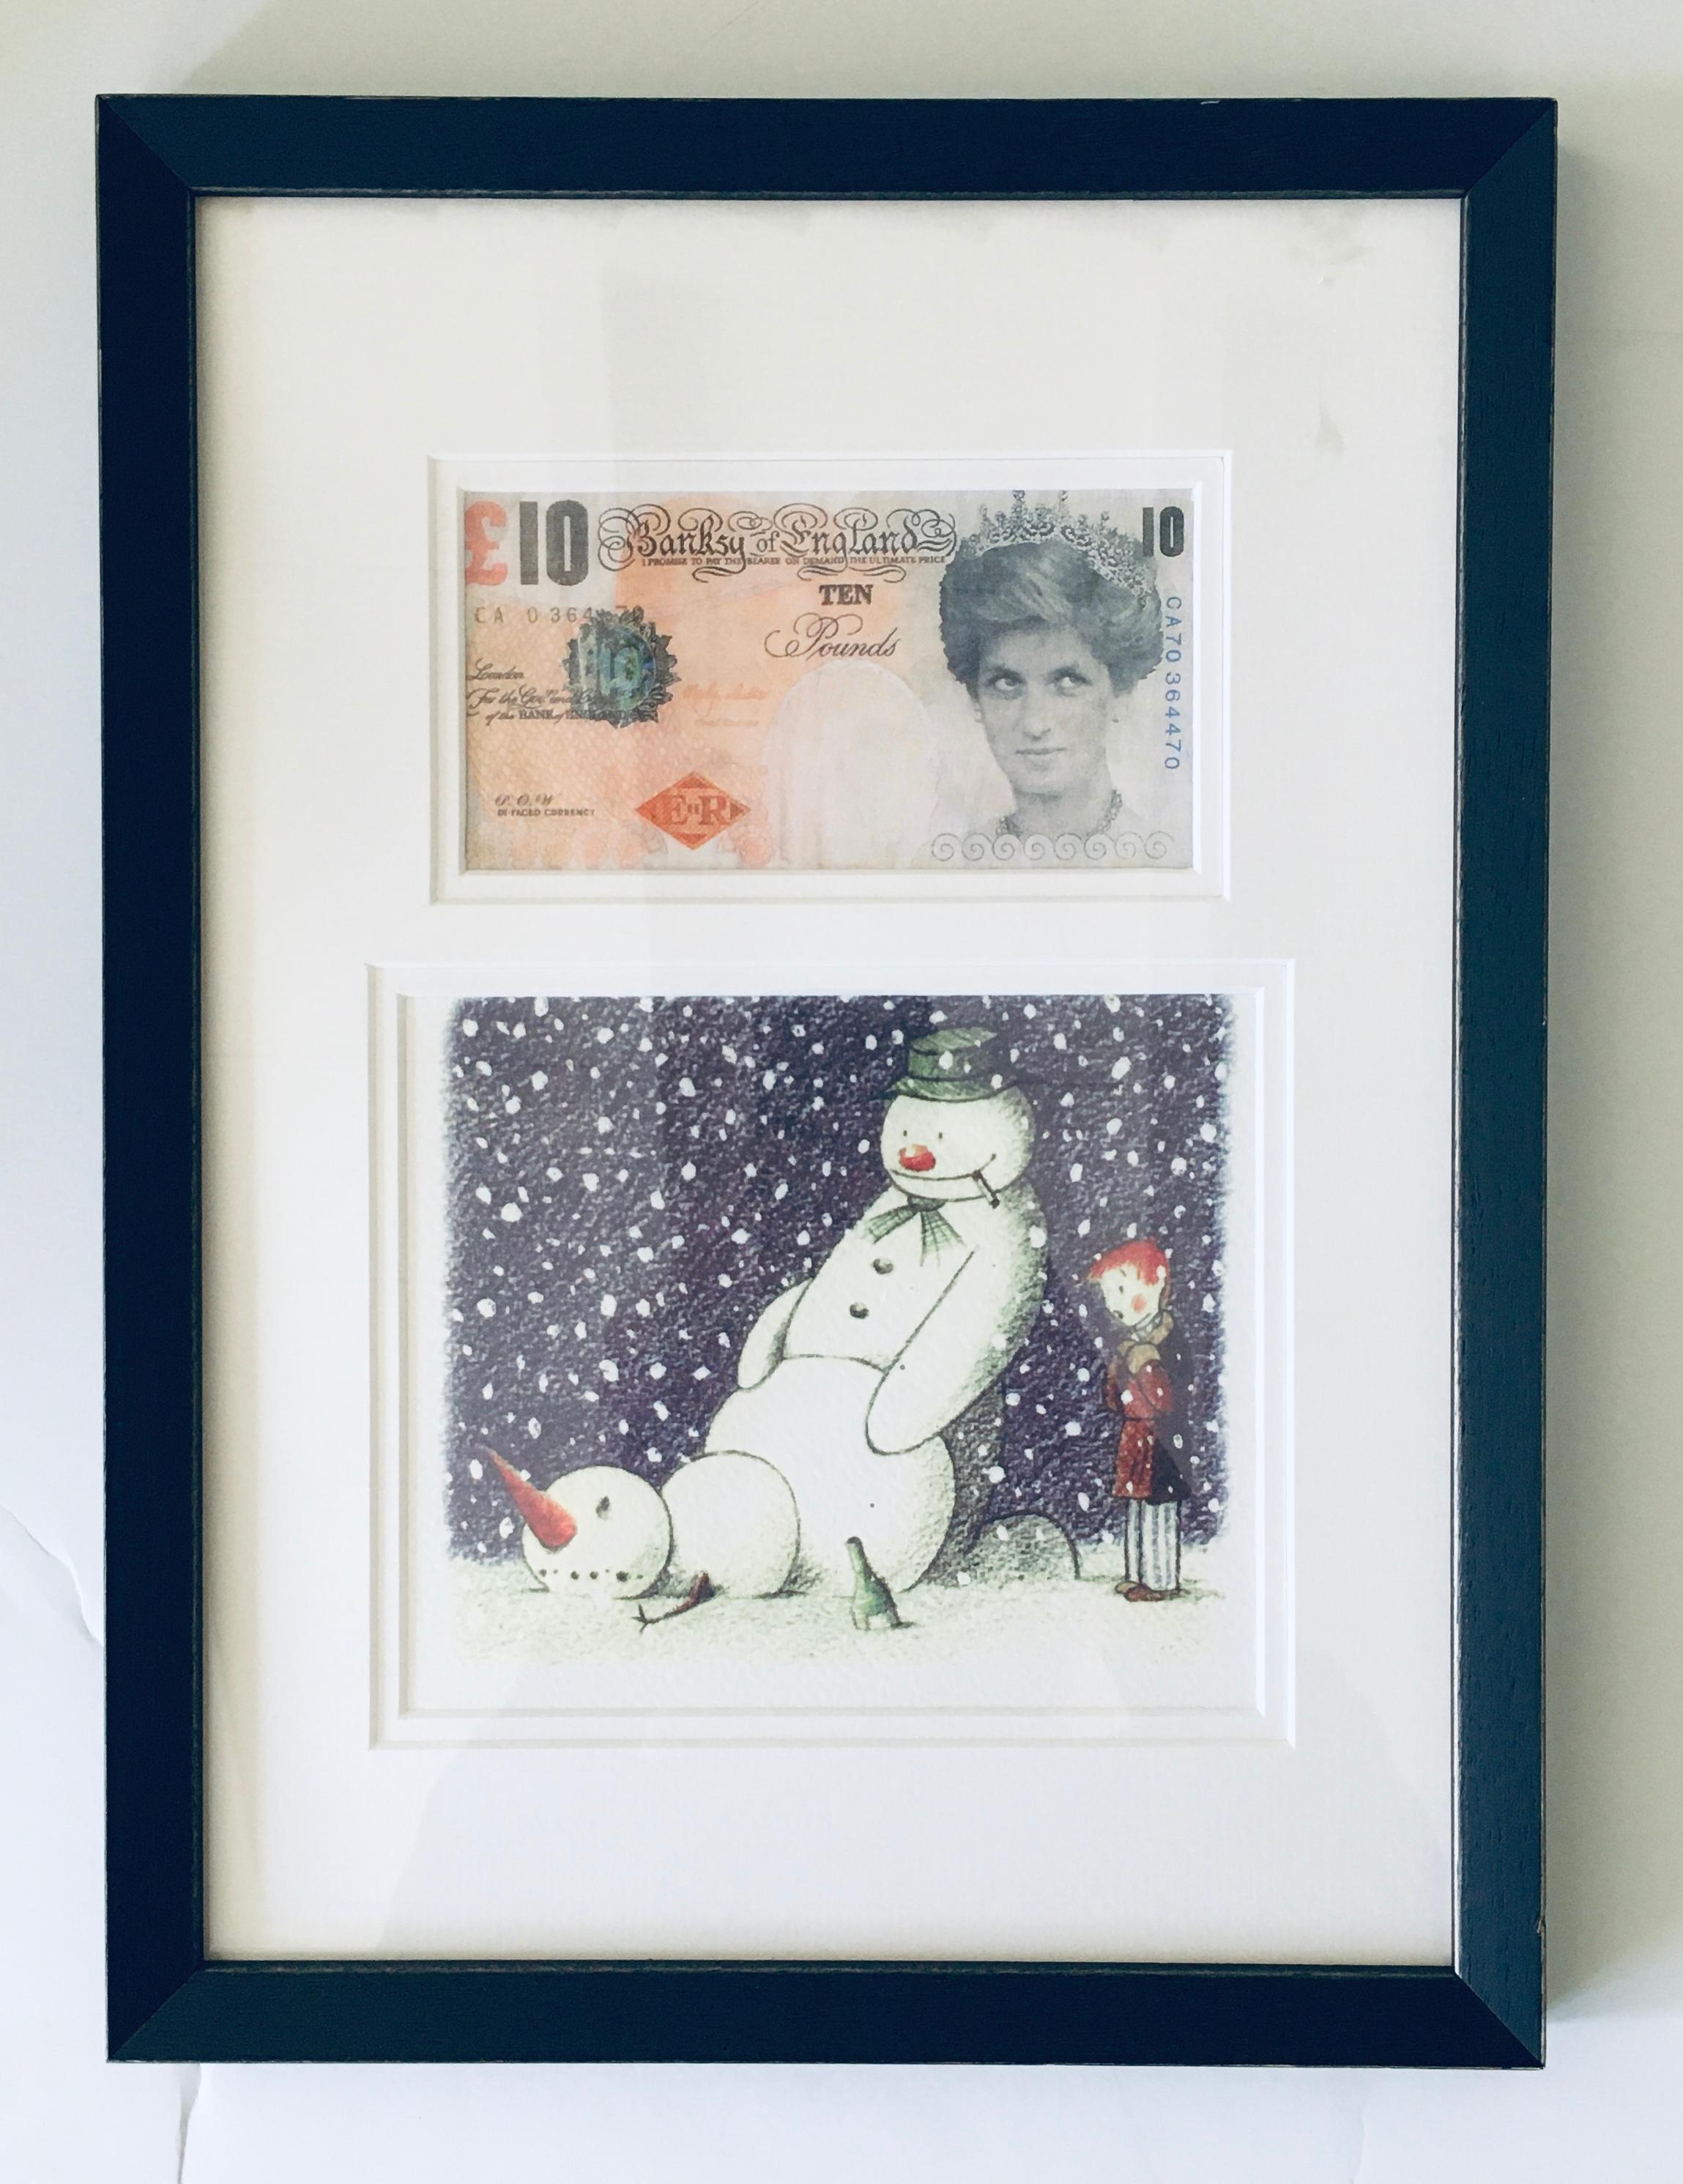 Banksy (British, b. 1974)
Di-Faced Tenner, 2005
Offset lithograph in colors
Sight: 2.75